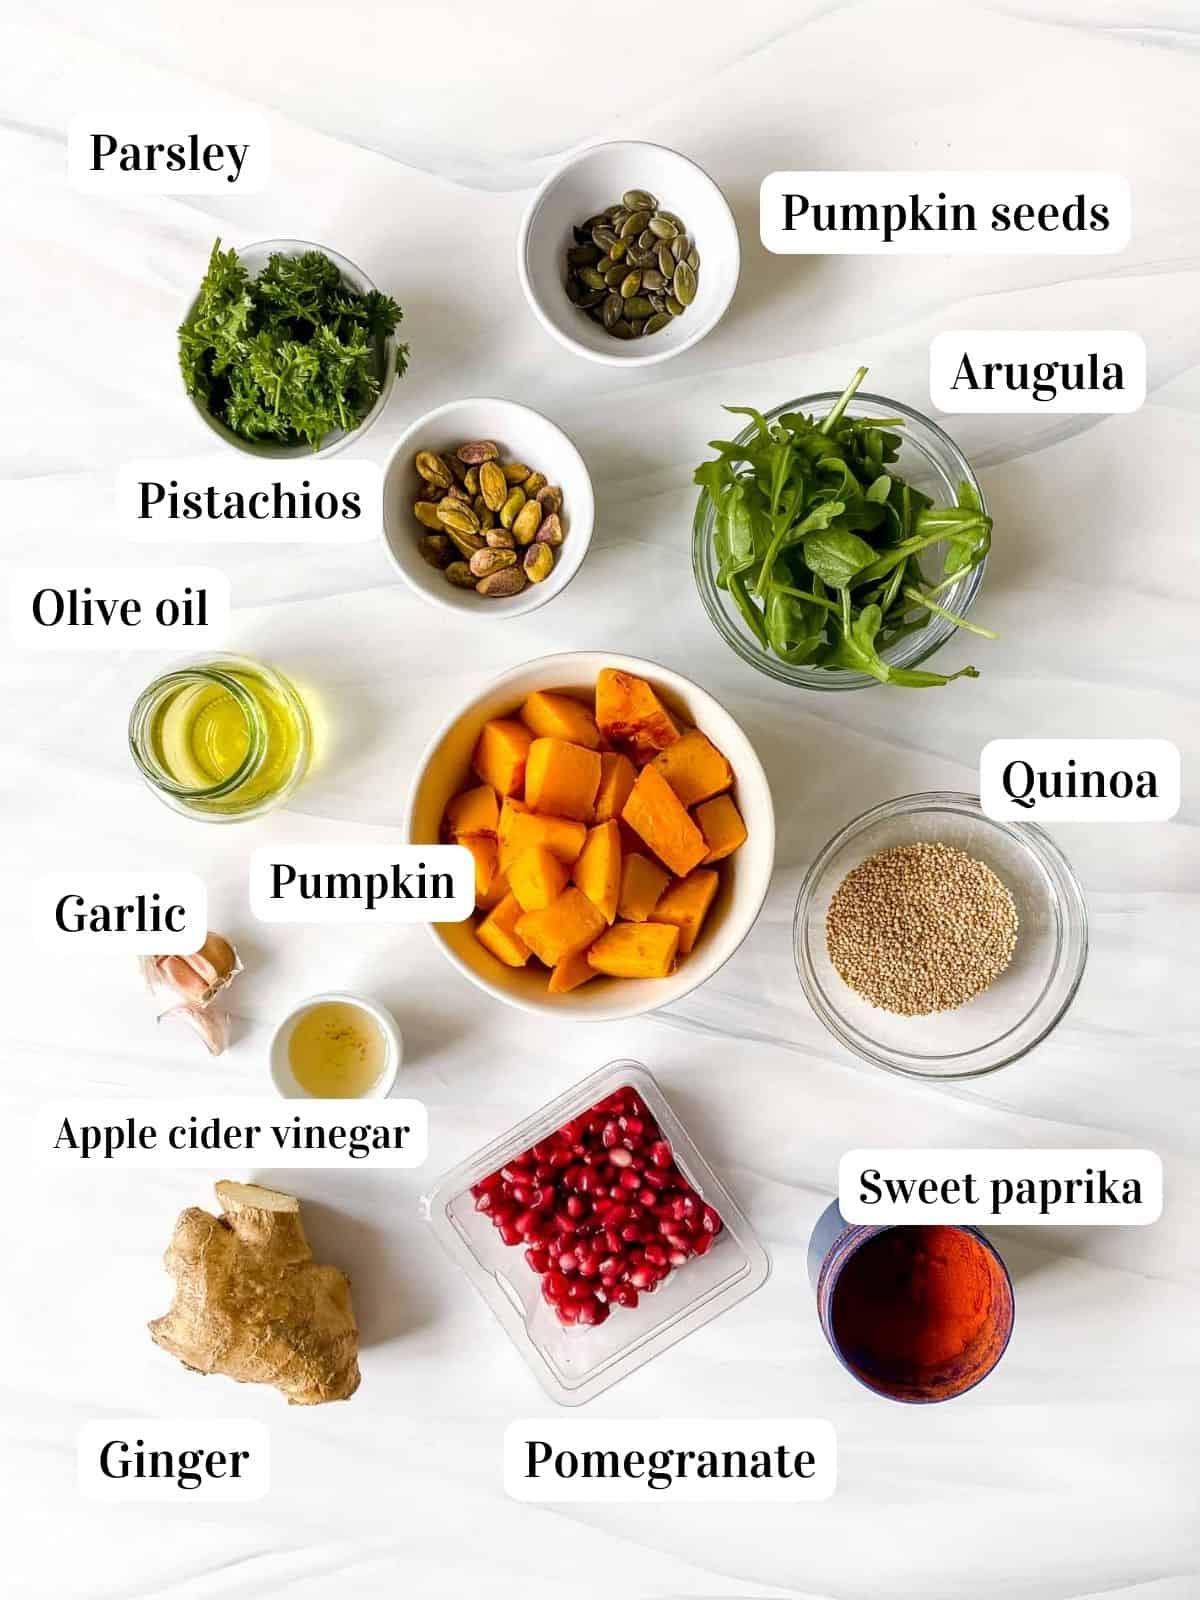 individually labelled ingredients to make pumpkin quinoa salad including olive oil, pistachios, pomegranate, ginger and arugula.